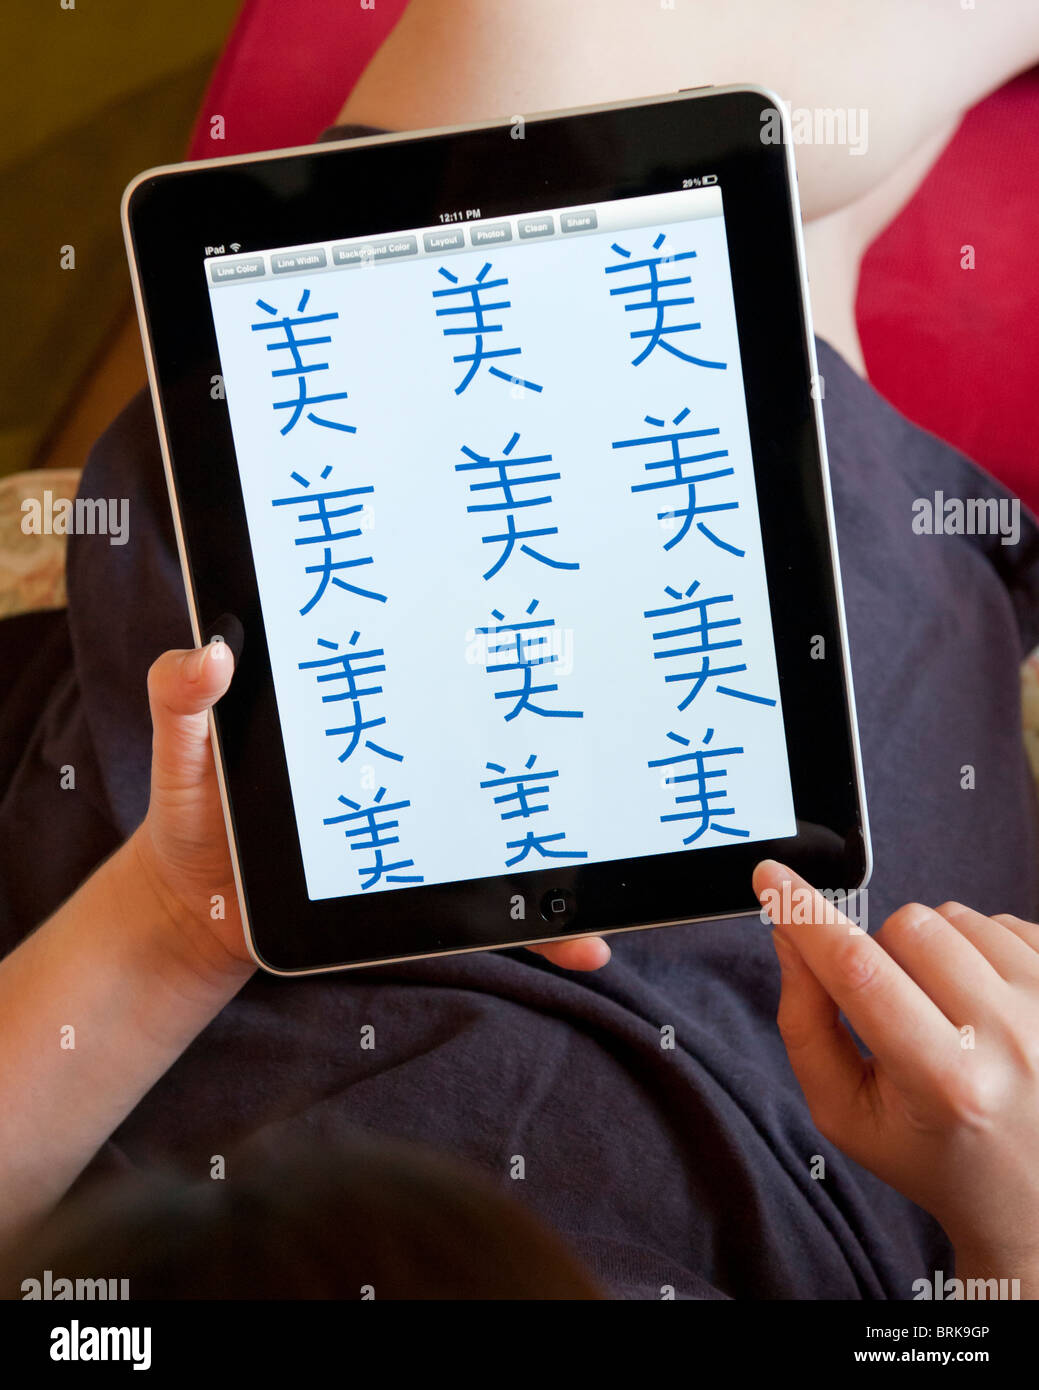 Woman practicing to write Chinese characters on an iPad tablet